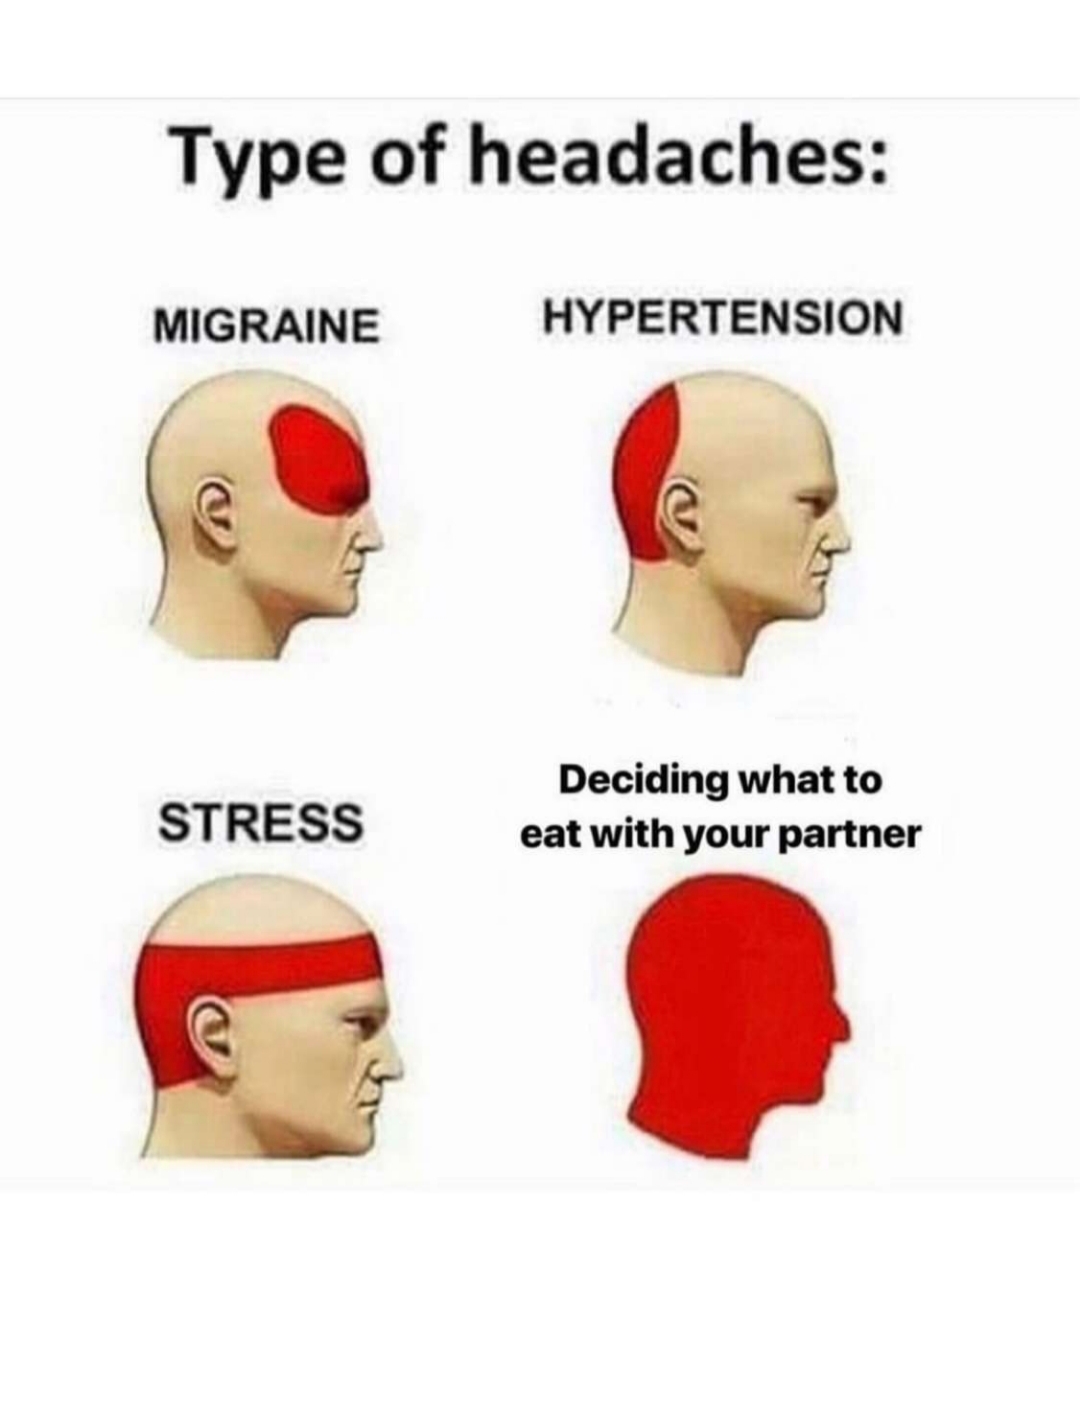 deciding where to eat meme - Type of headaches Migraine Hypertension Stress Deciding what to eat with your partner